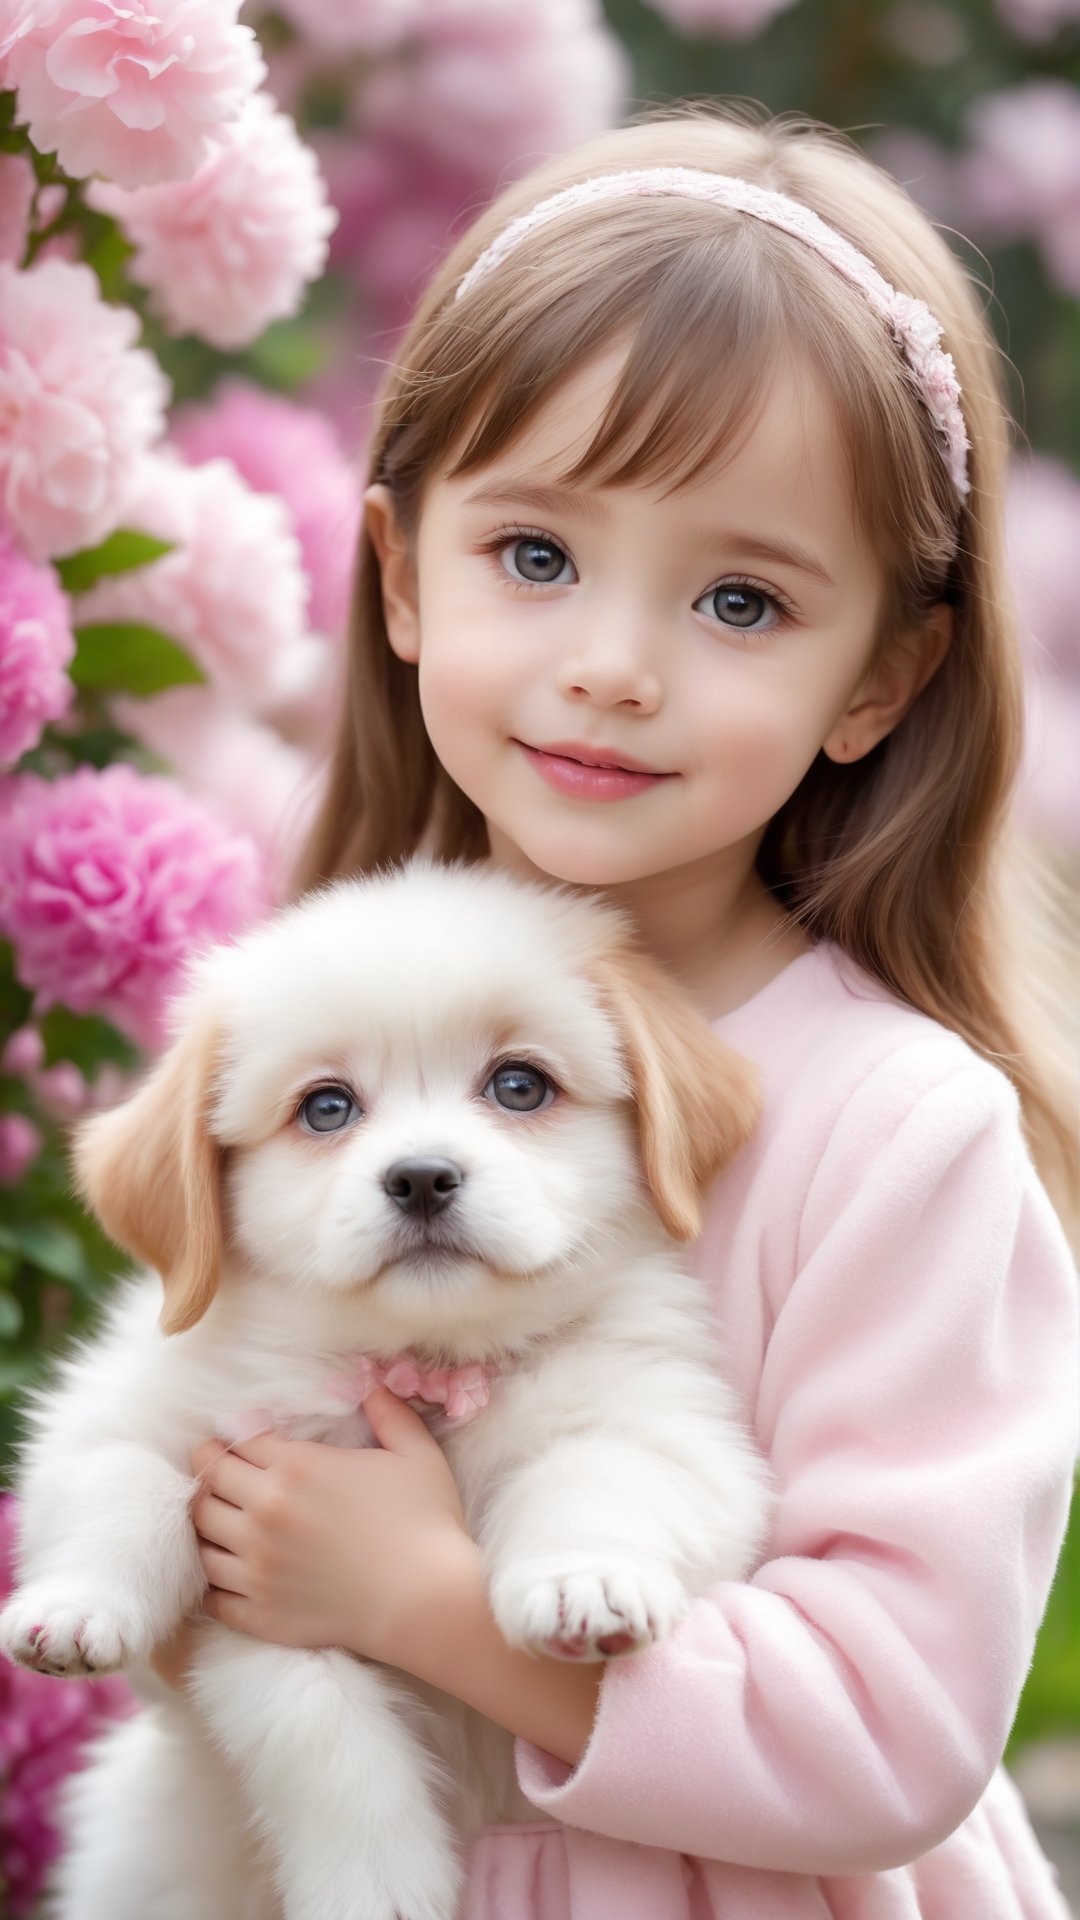 Evoke pure joy with a high-detailed scene of a cute, beautiful big eyes so adorable little girl wearing fluffy pink and white dress and coat, playing with a fluffy puppy. Capture the innocence and happiness in their interaction, ensuring the image radiates warmth and charm.happiness and enjoy the best moment to smiling, high quality portrait photography, flowers bloom beautiful bokeh background.
,3DMM